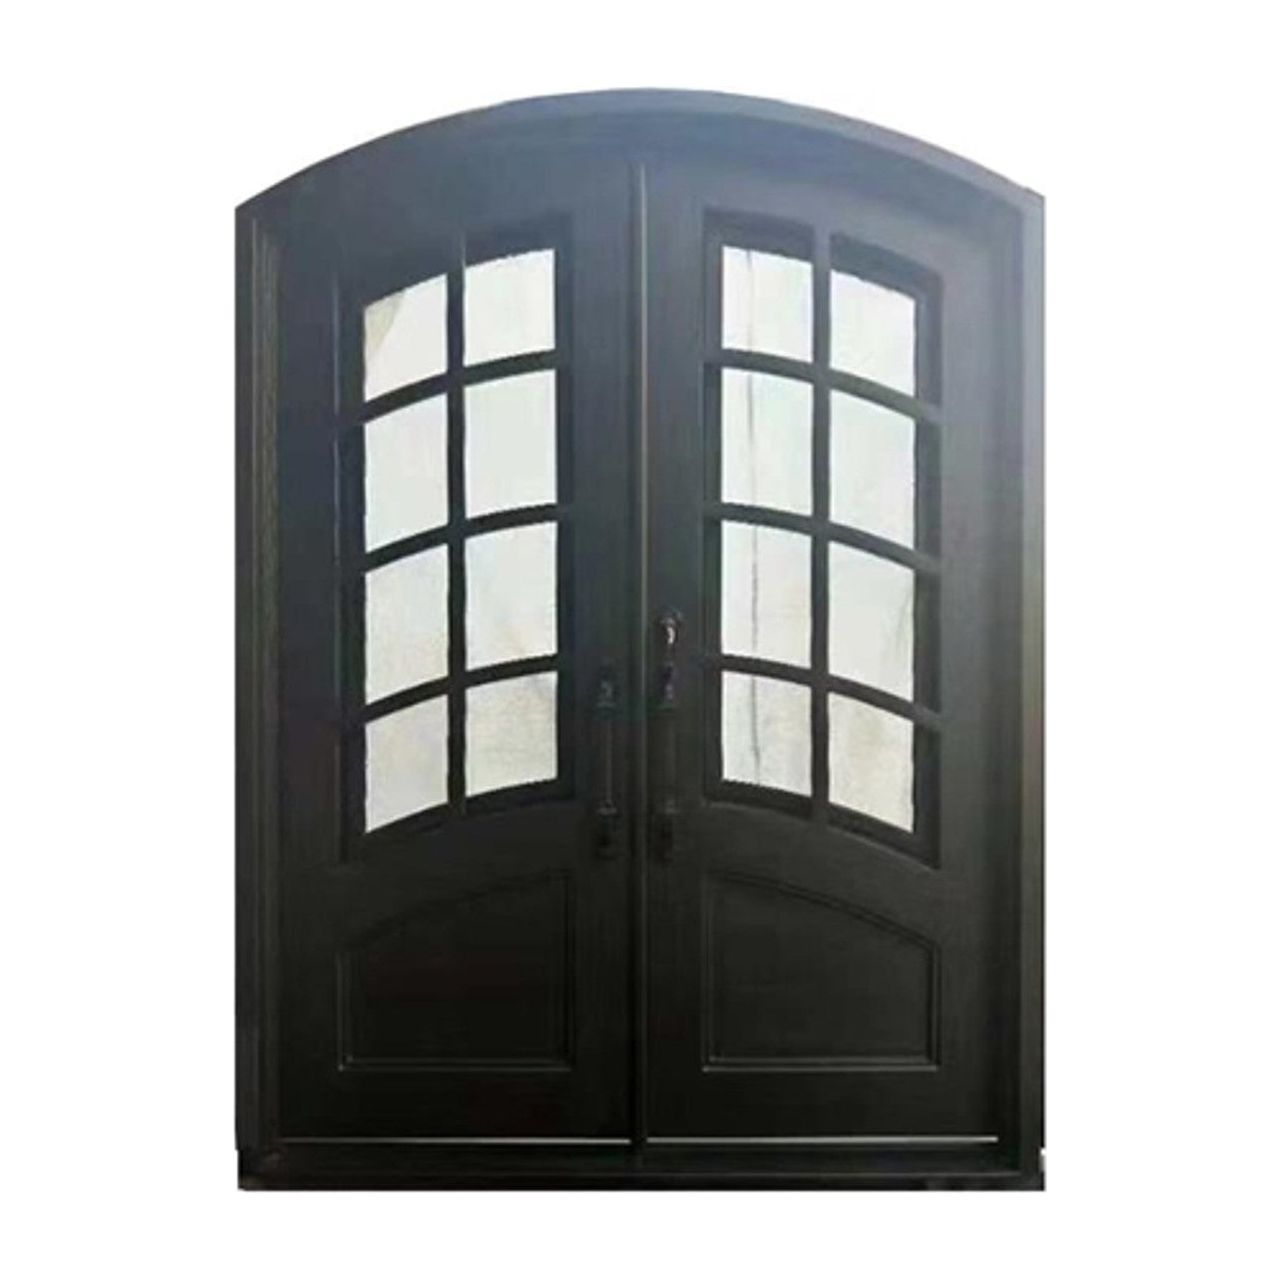 Aleko Iron Arched Top Minimalist Glass-Panel Dual Door with Frame and Threshold - 92 x 72 Inches - Matte Black IDR7296BK15-AP - Serenity Provision